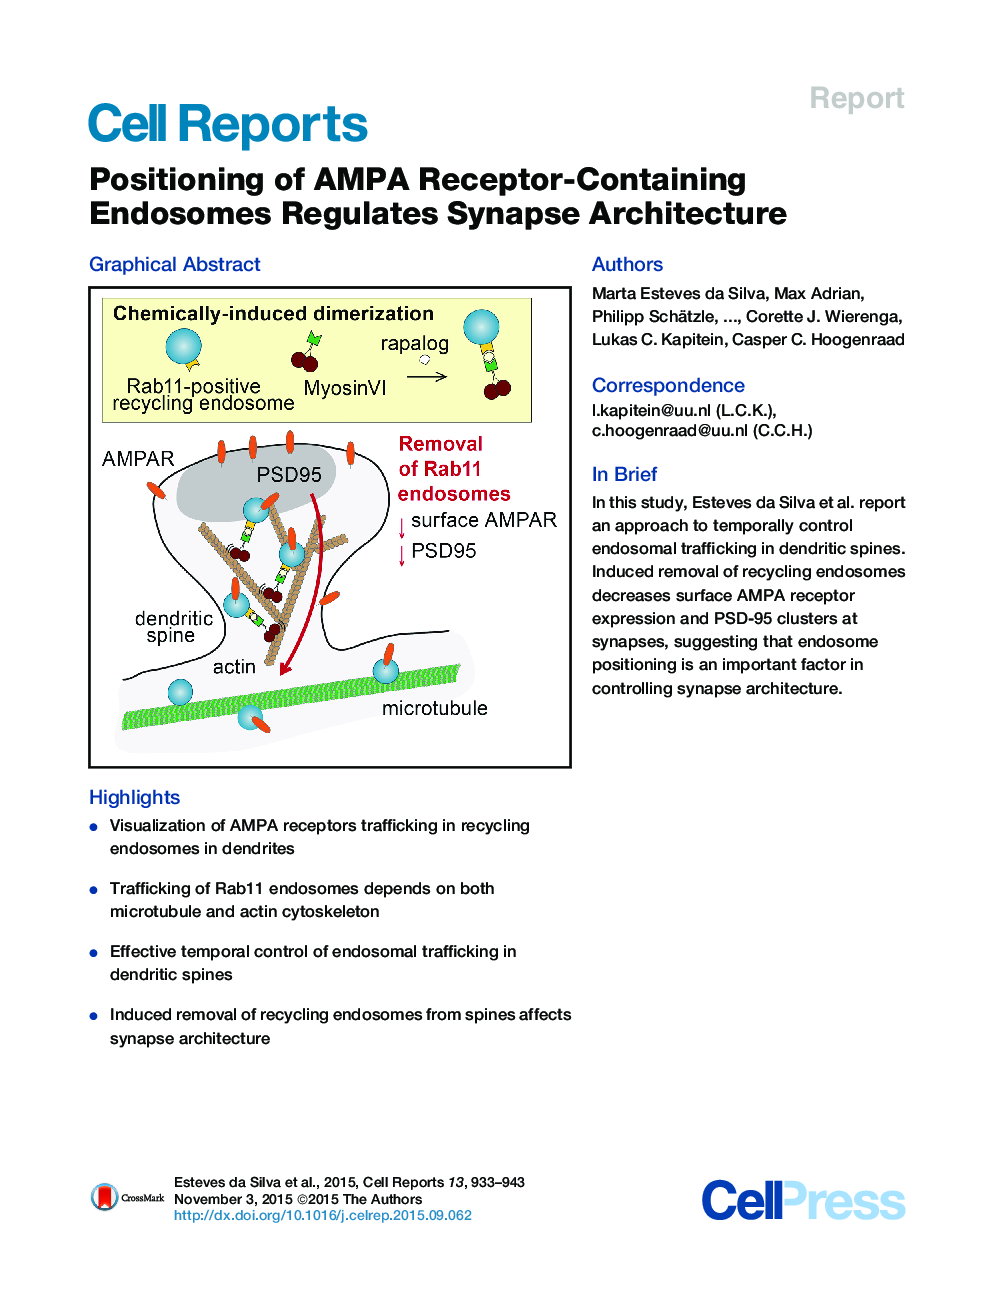 Positioning of AMPA Receptor-Containing Endosomes Regulates Synapse Architecture